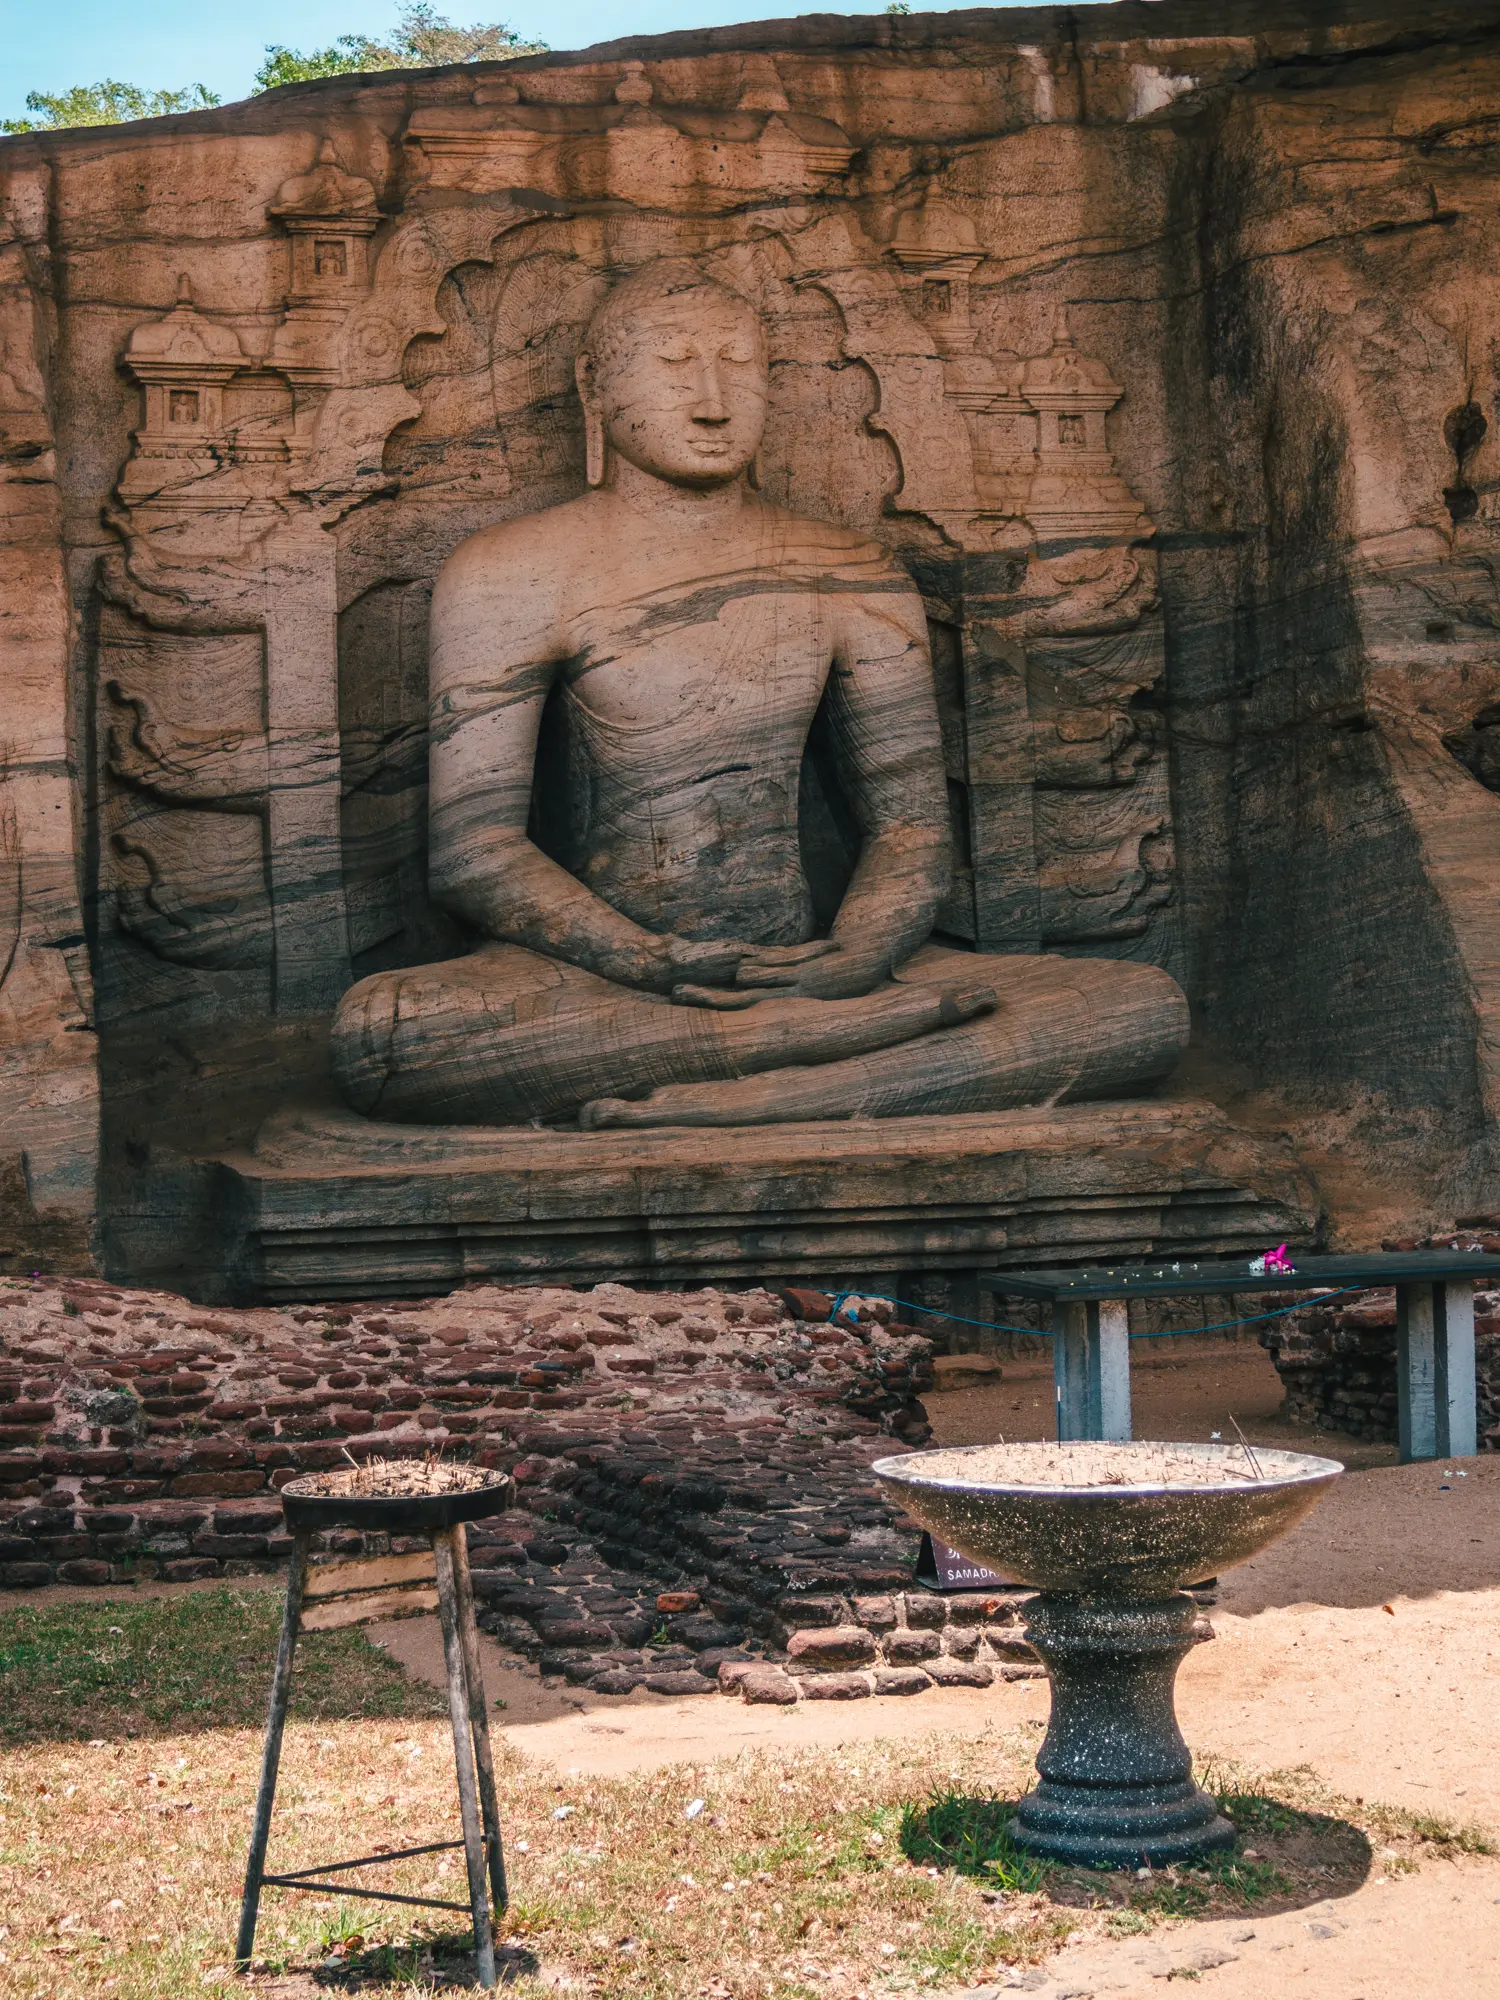 Large Buddha in lotus position carved into the rockface at Gal Vihara in Polonnaruwa.